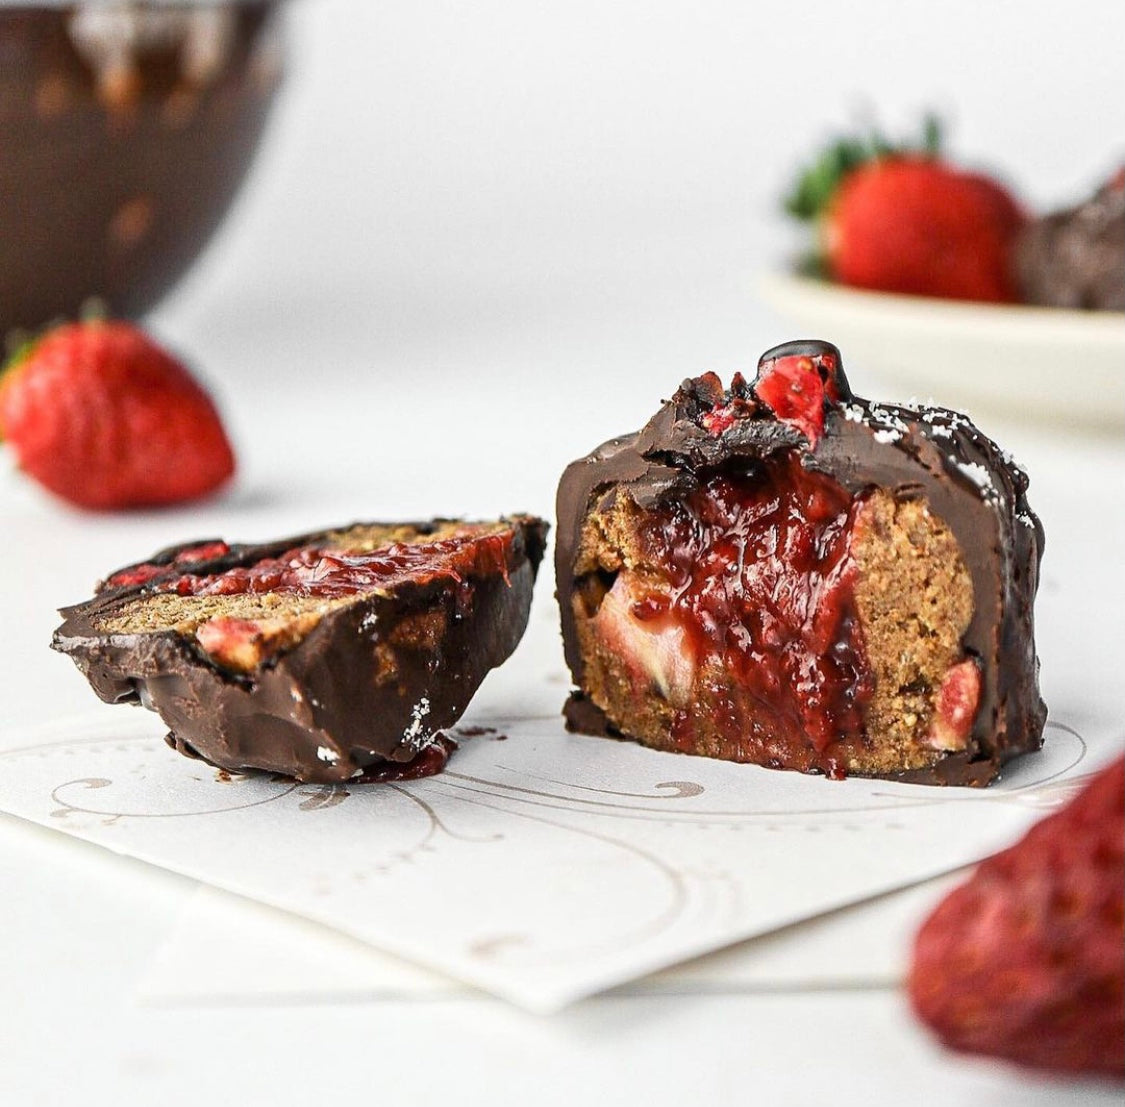 Chocolate Strawberry Pea Protein Ball (available in sugar-free chocolate coating)